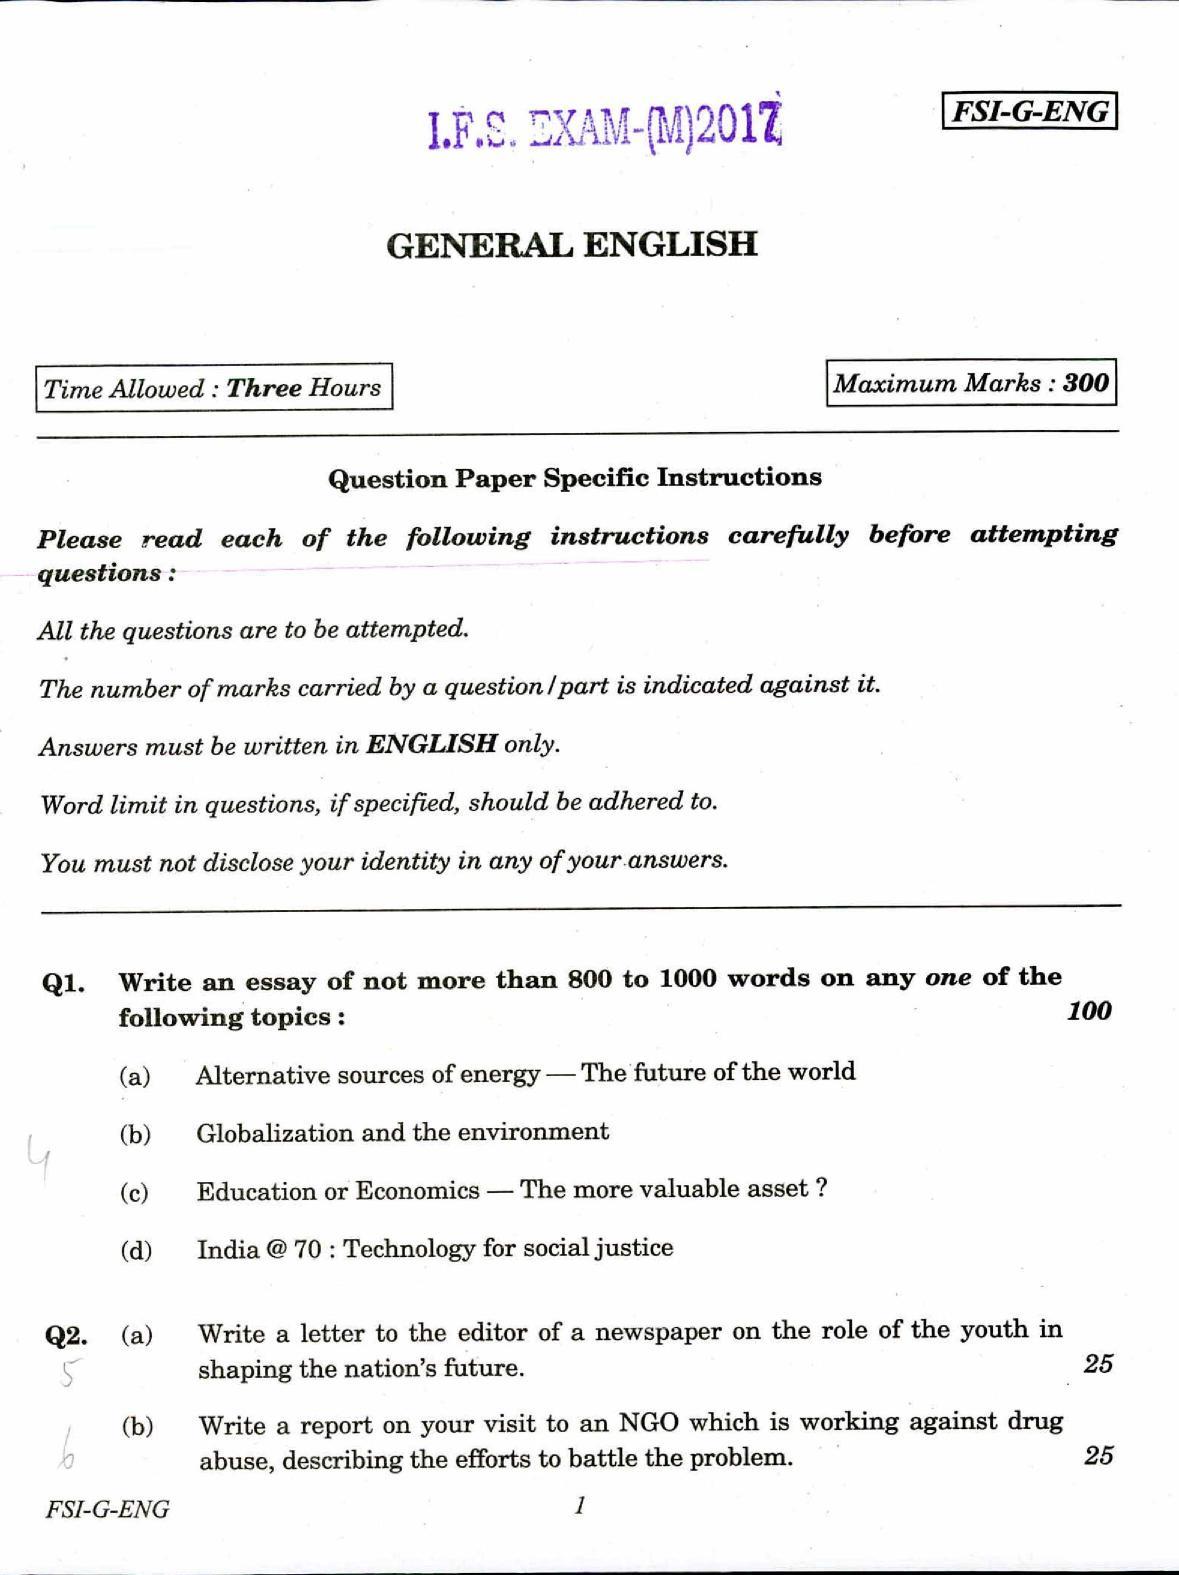 Deputy Commissioner Jorhat JA Old Papers – General English - Page 3